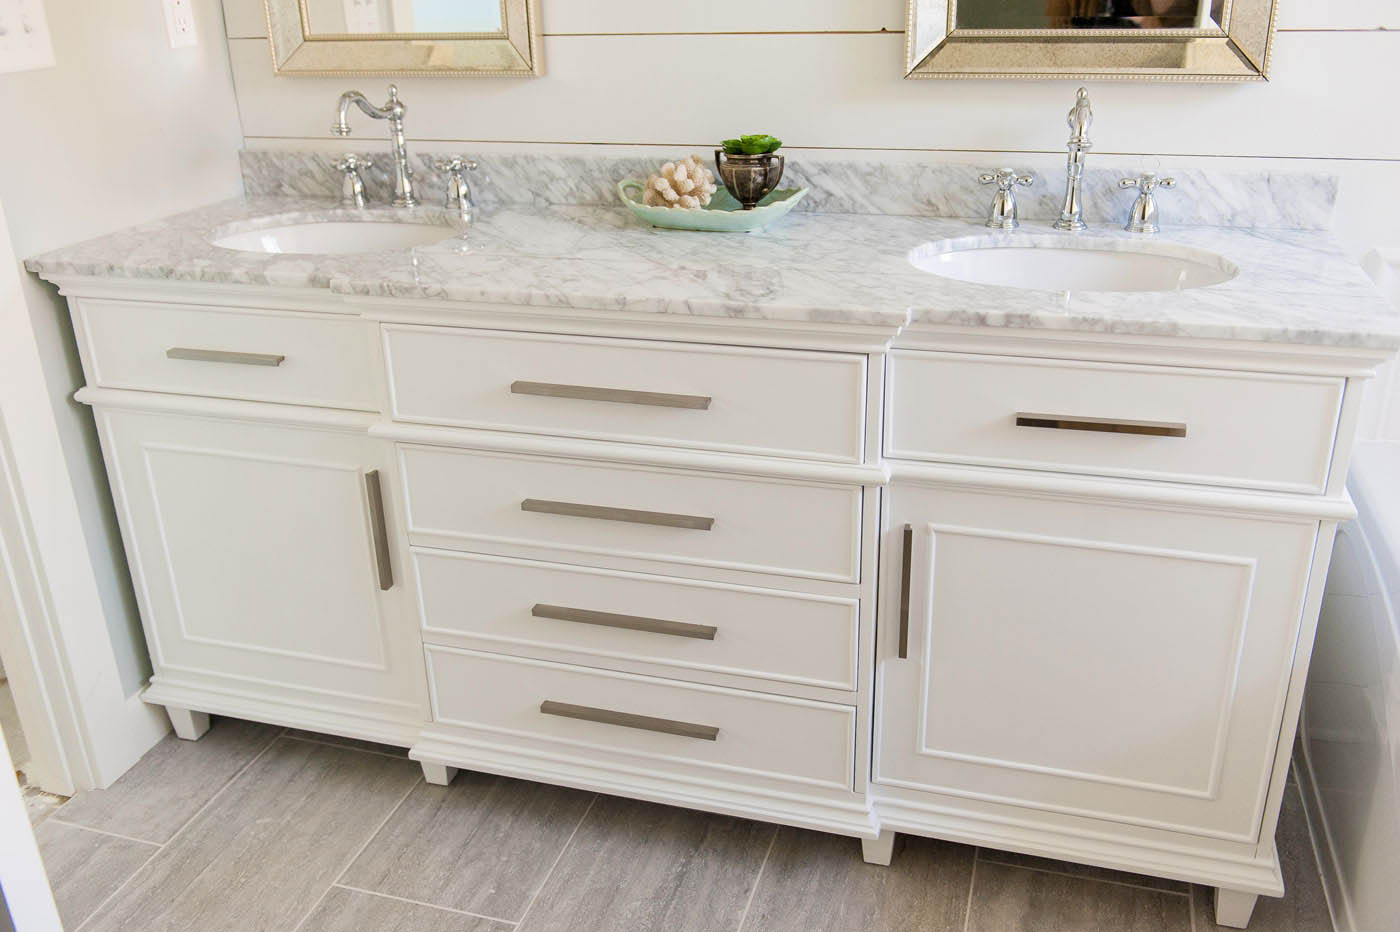 The Ultimate Guide To Buying A Bathroom Vanity The Harper House